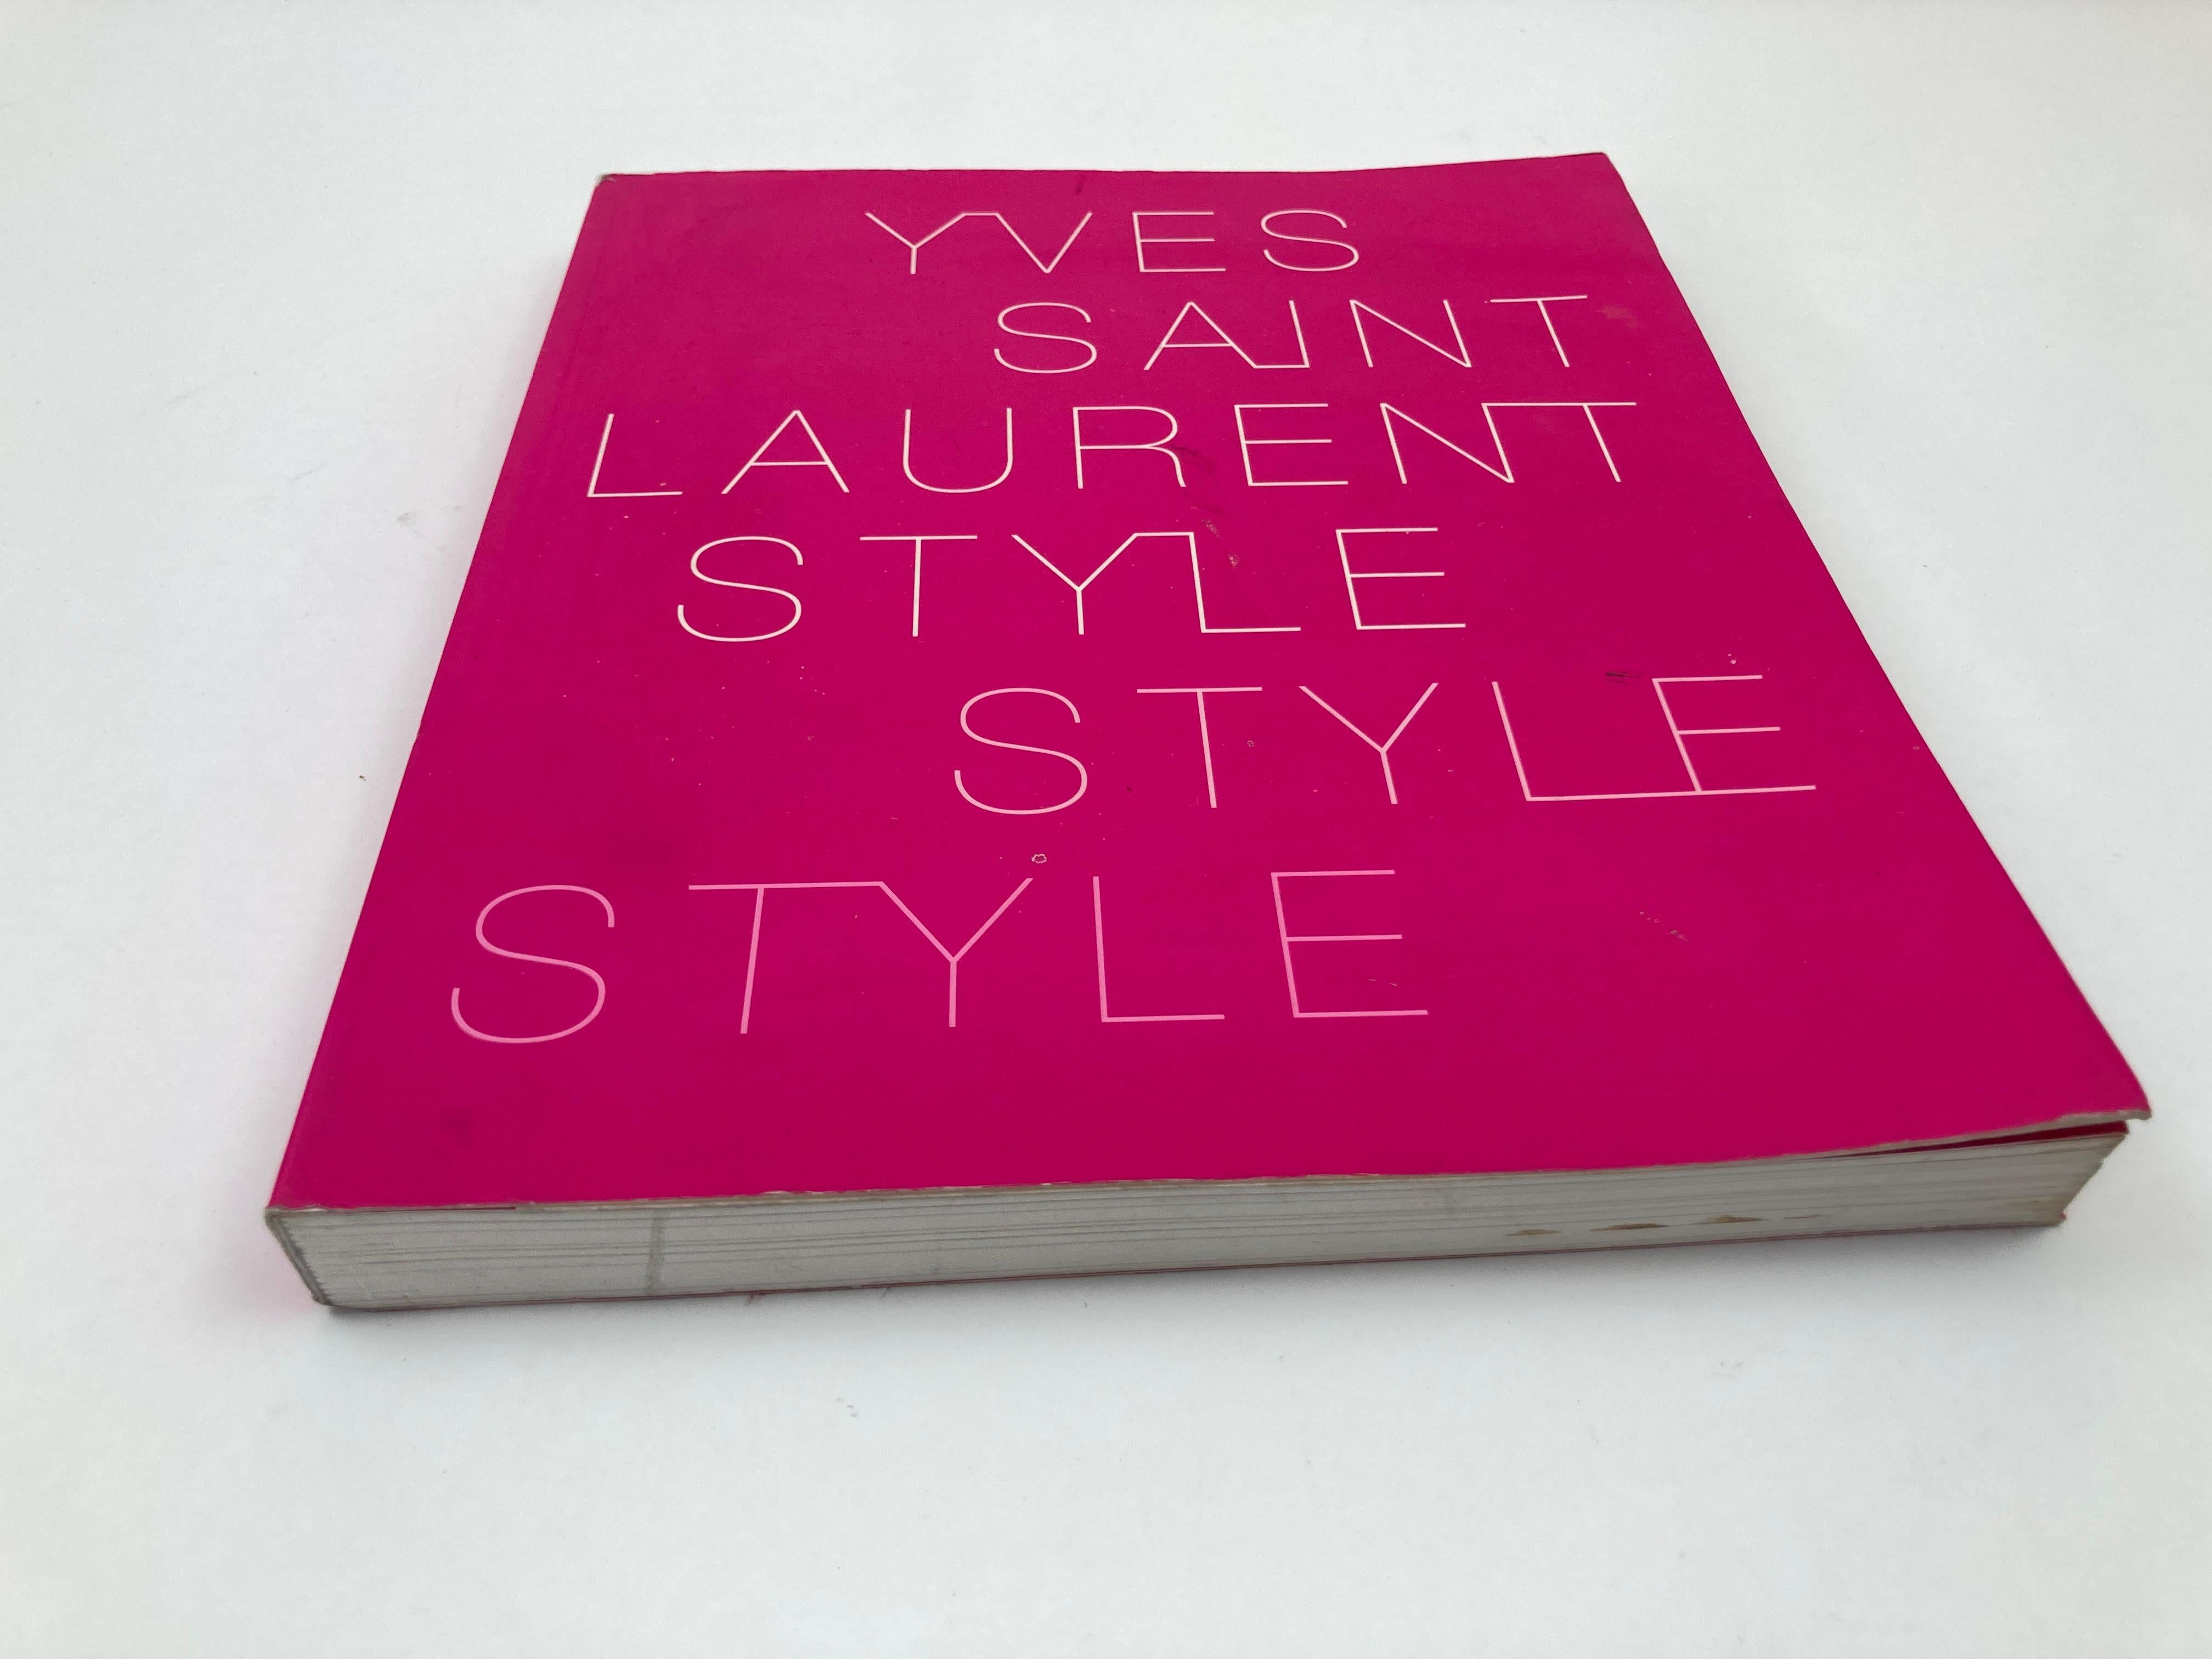 Yves Saint Laurent: Style Paperback 2008 by Foundation Pierre Berge Pink book.
In collaboration with Fondation Pierre Bergé–Yves Saint Laurent.Yves Saint Laurent’s signature style intertwines references from the art world with those of popular